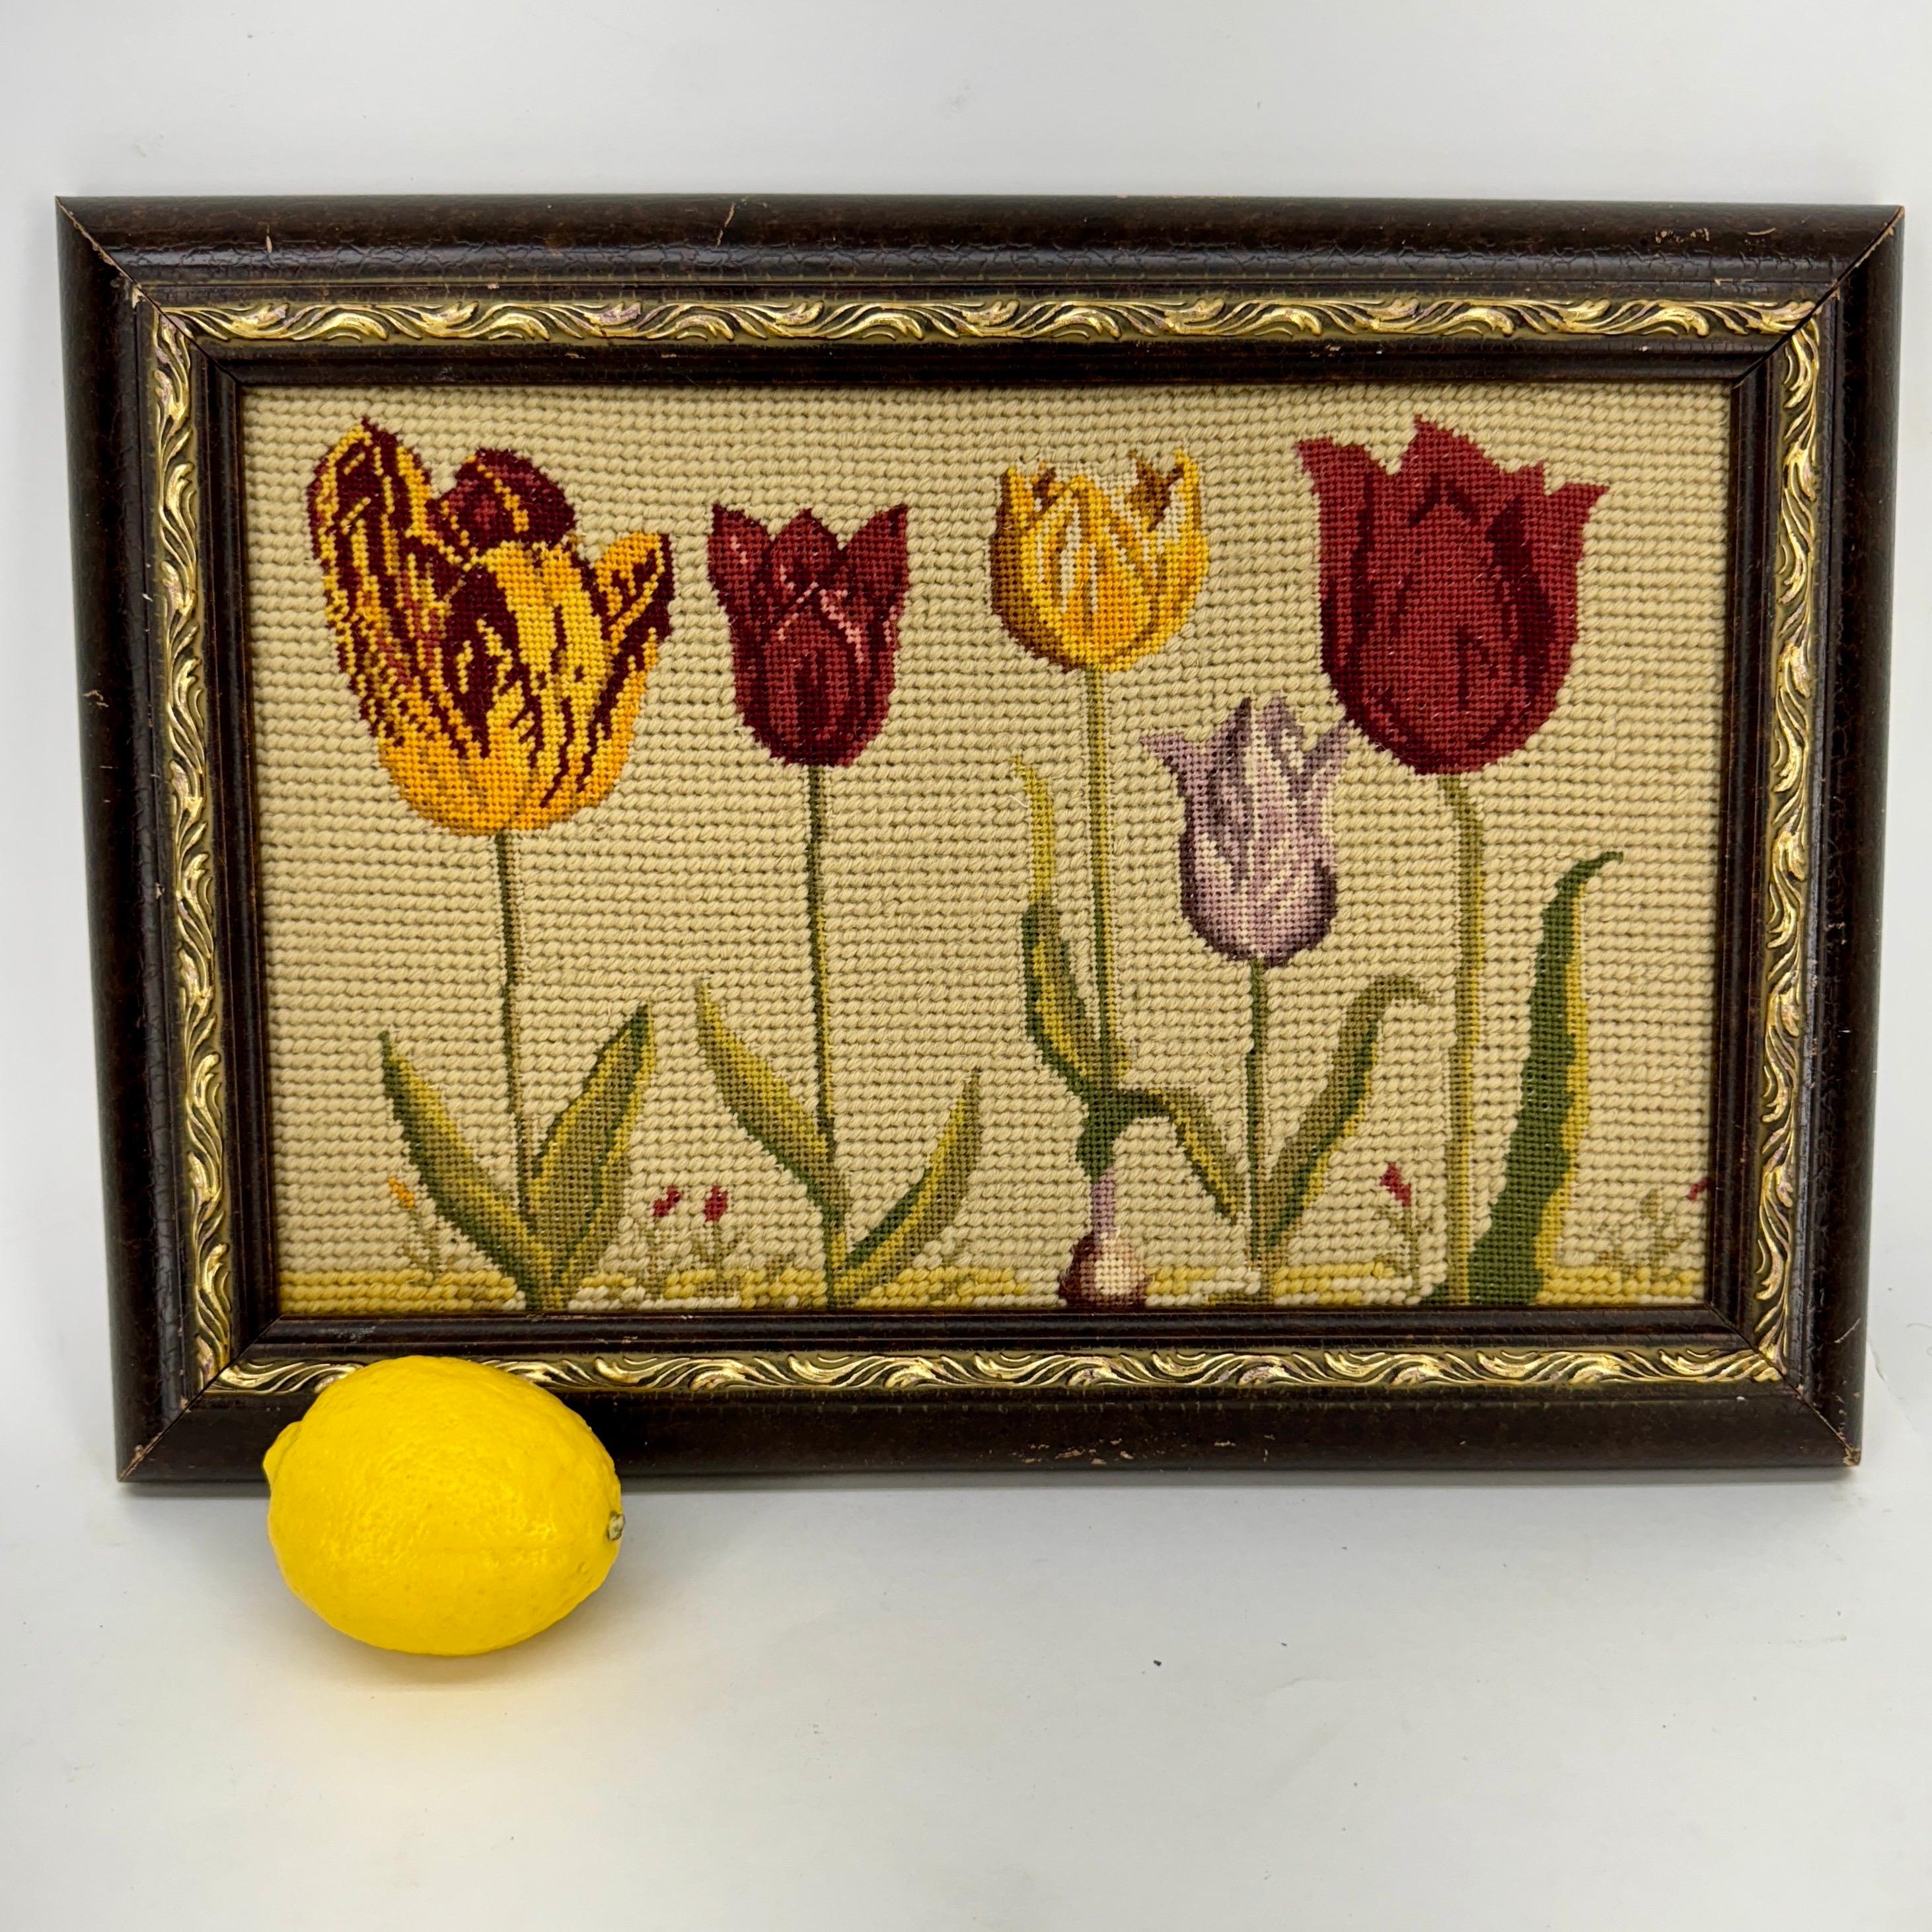 Folk Art Chelsea Textiles Original Needlepoint Tulip Artwork In Red White and Yellow For Sale